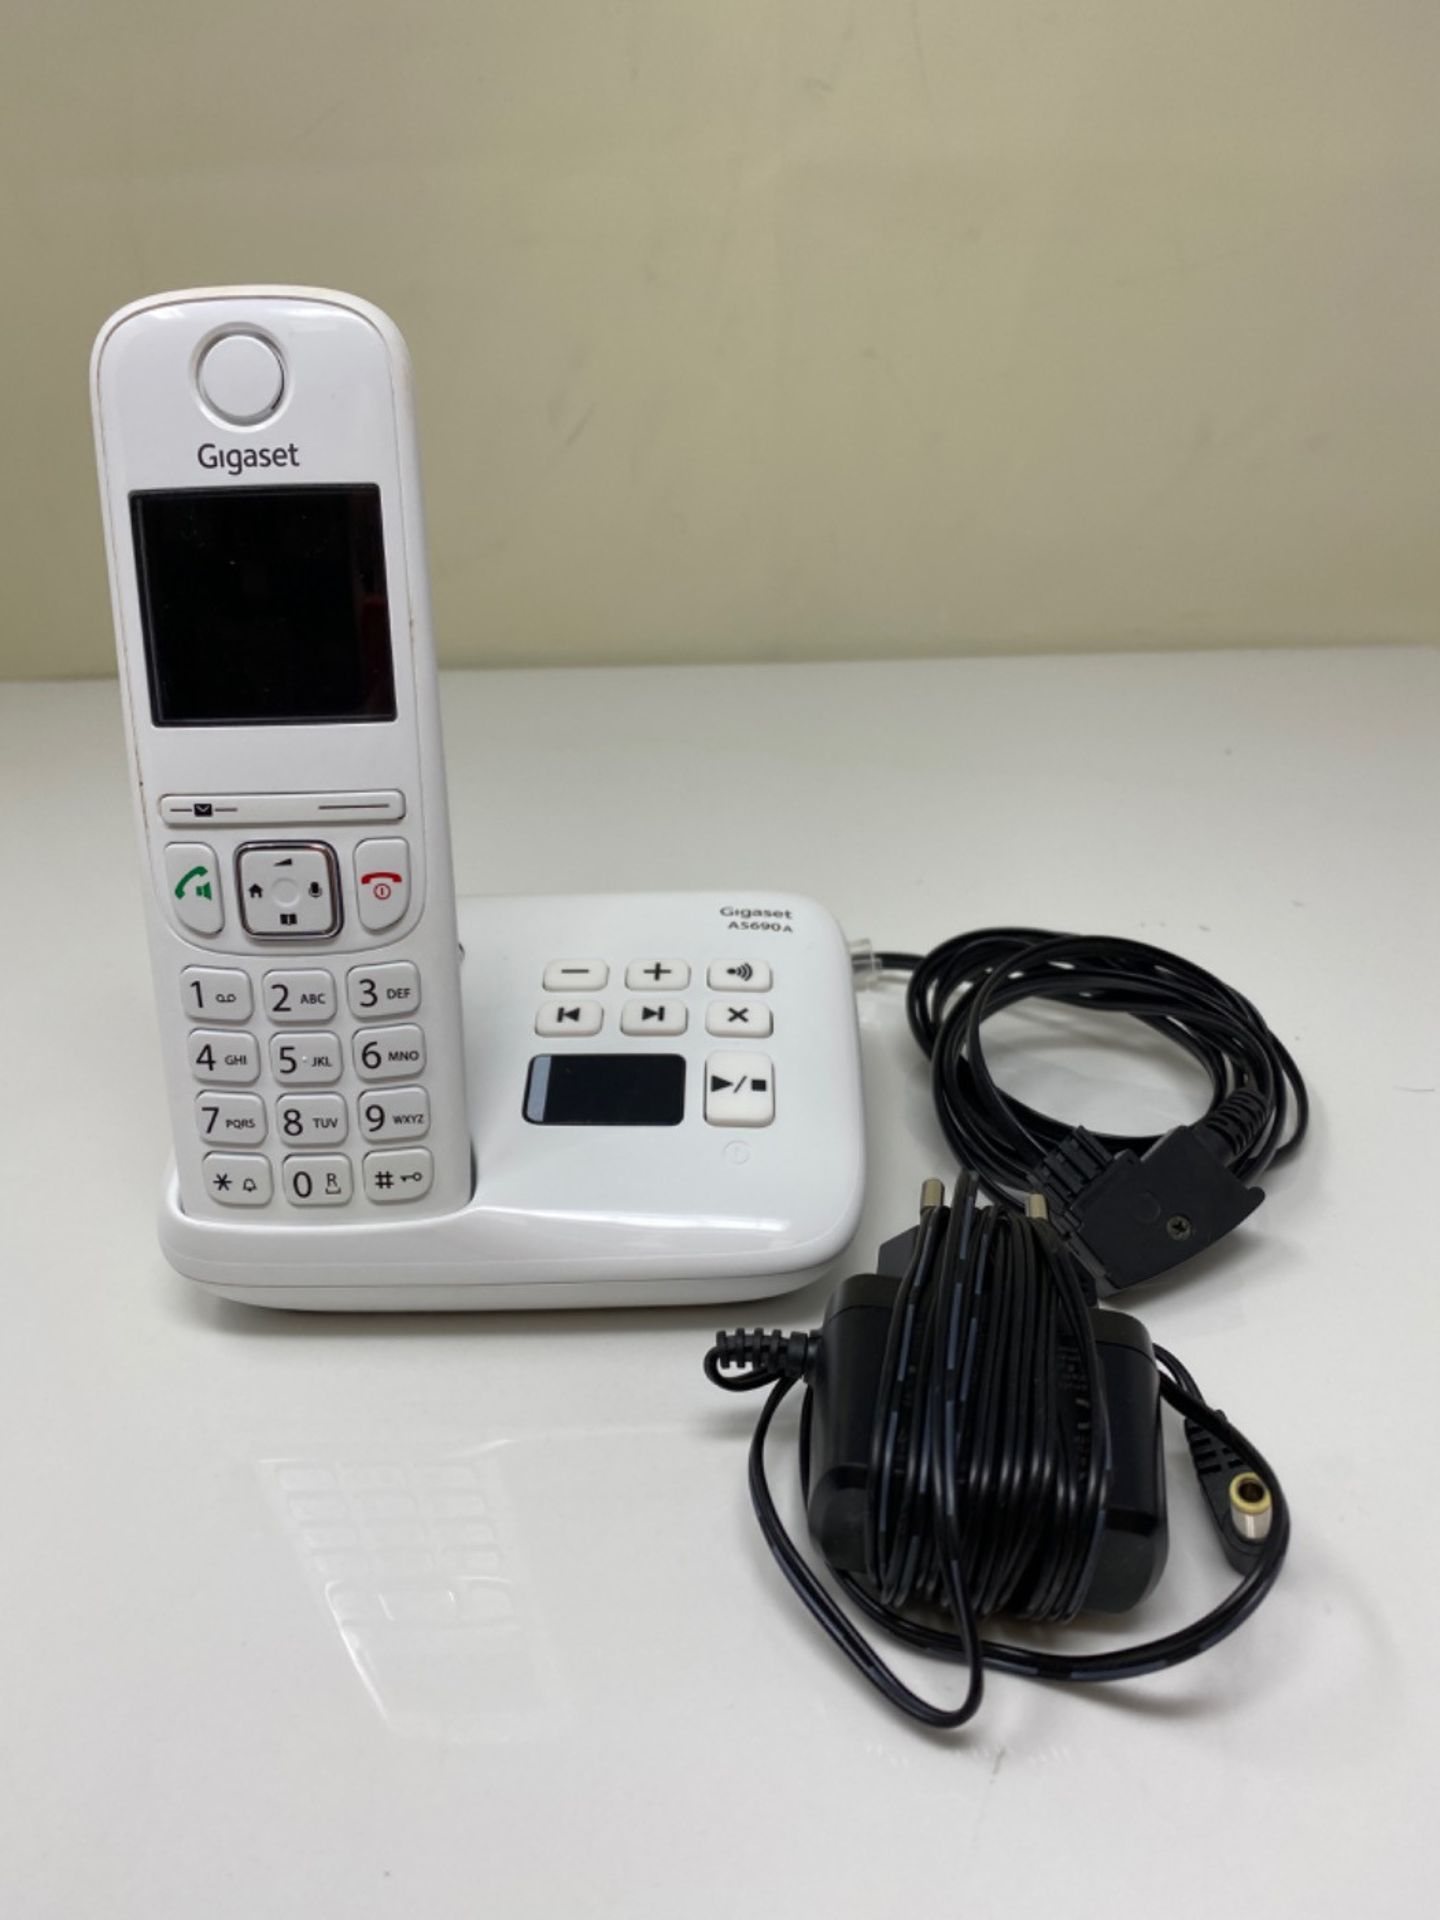 Gigaset AS690A, cordless telephone with answering machine - large, high-contrast displ - Image 2 of 2